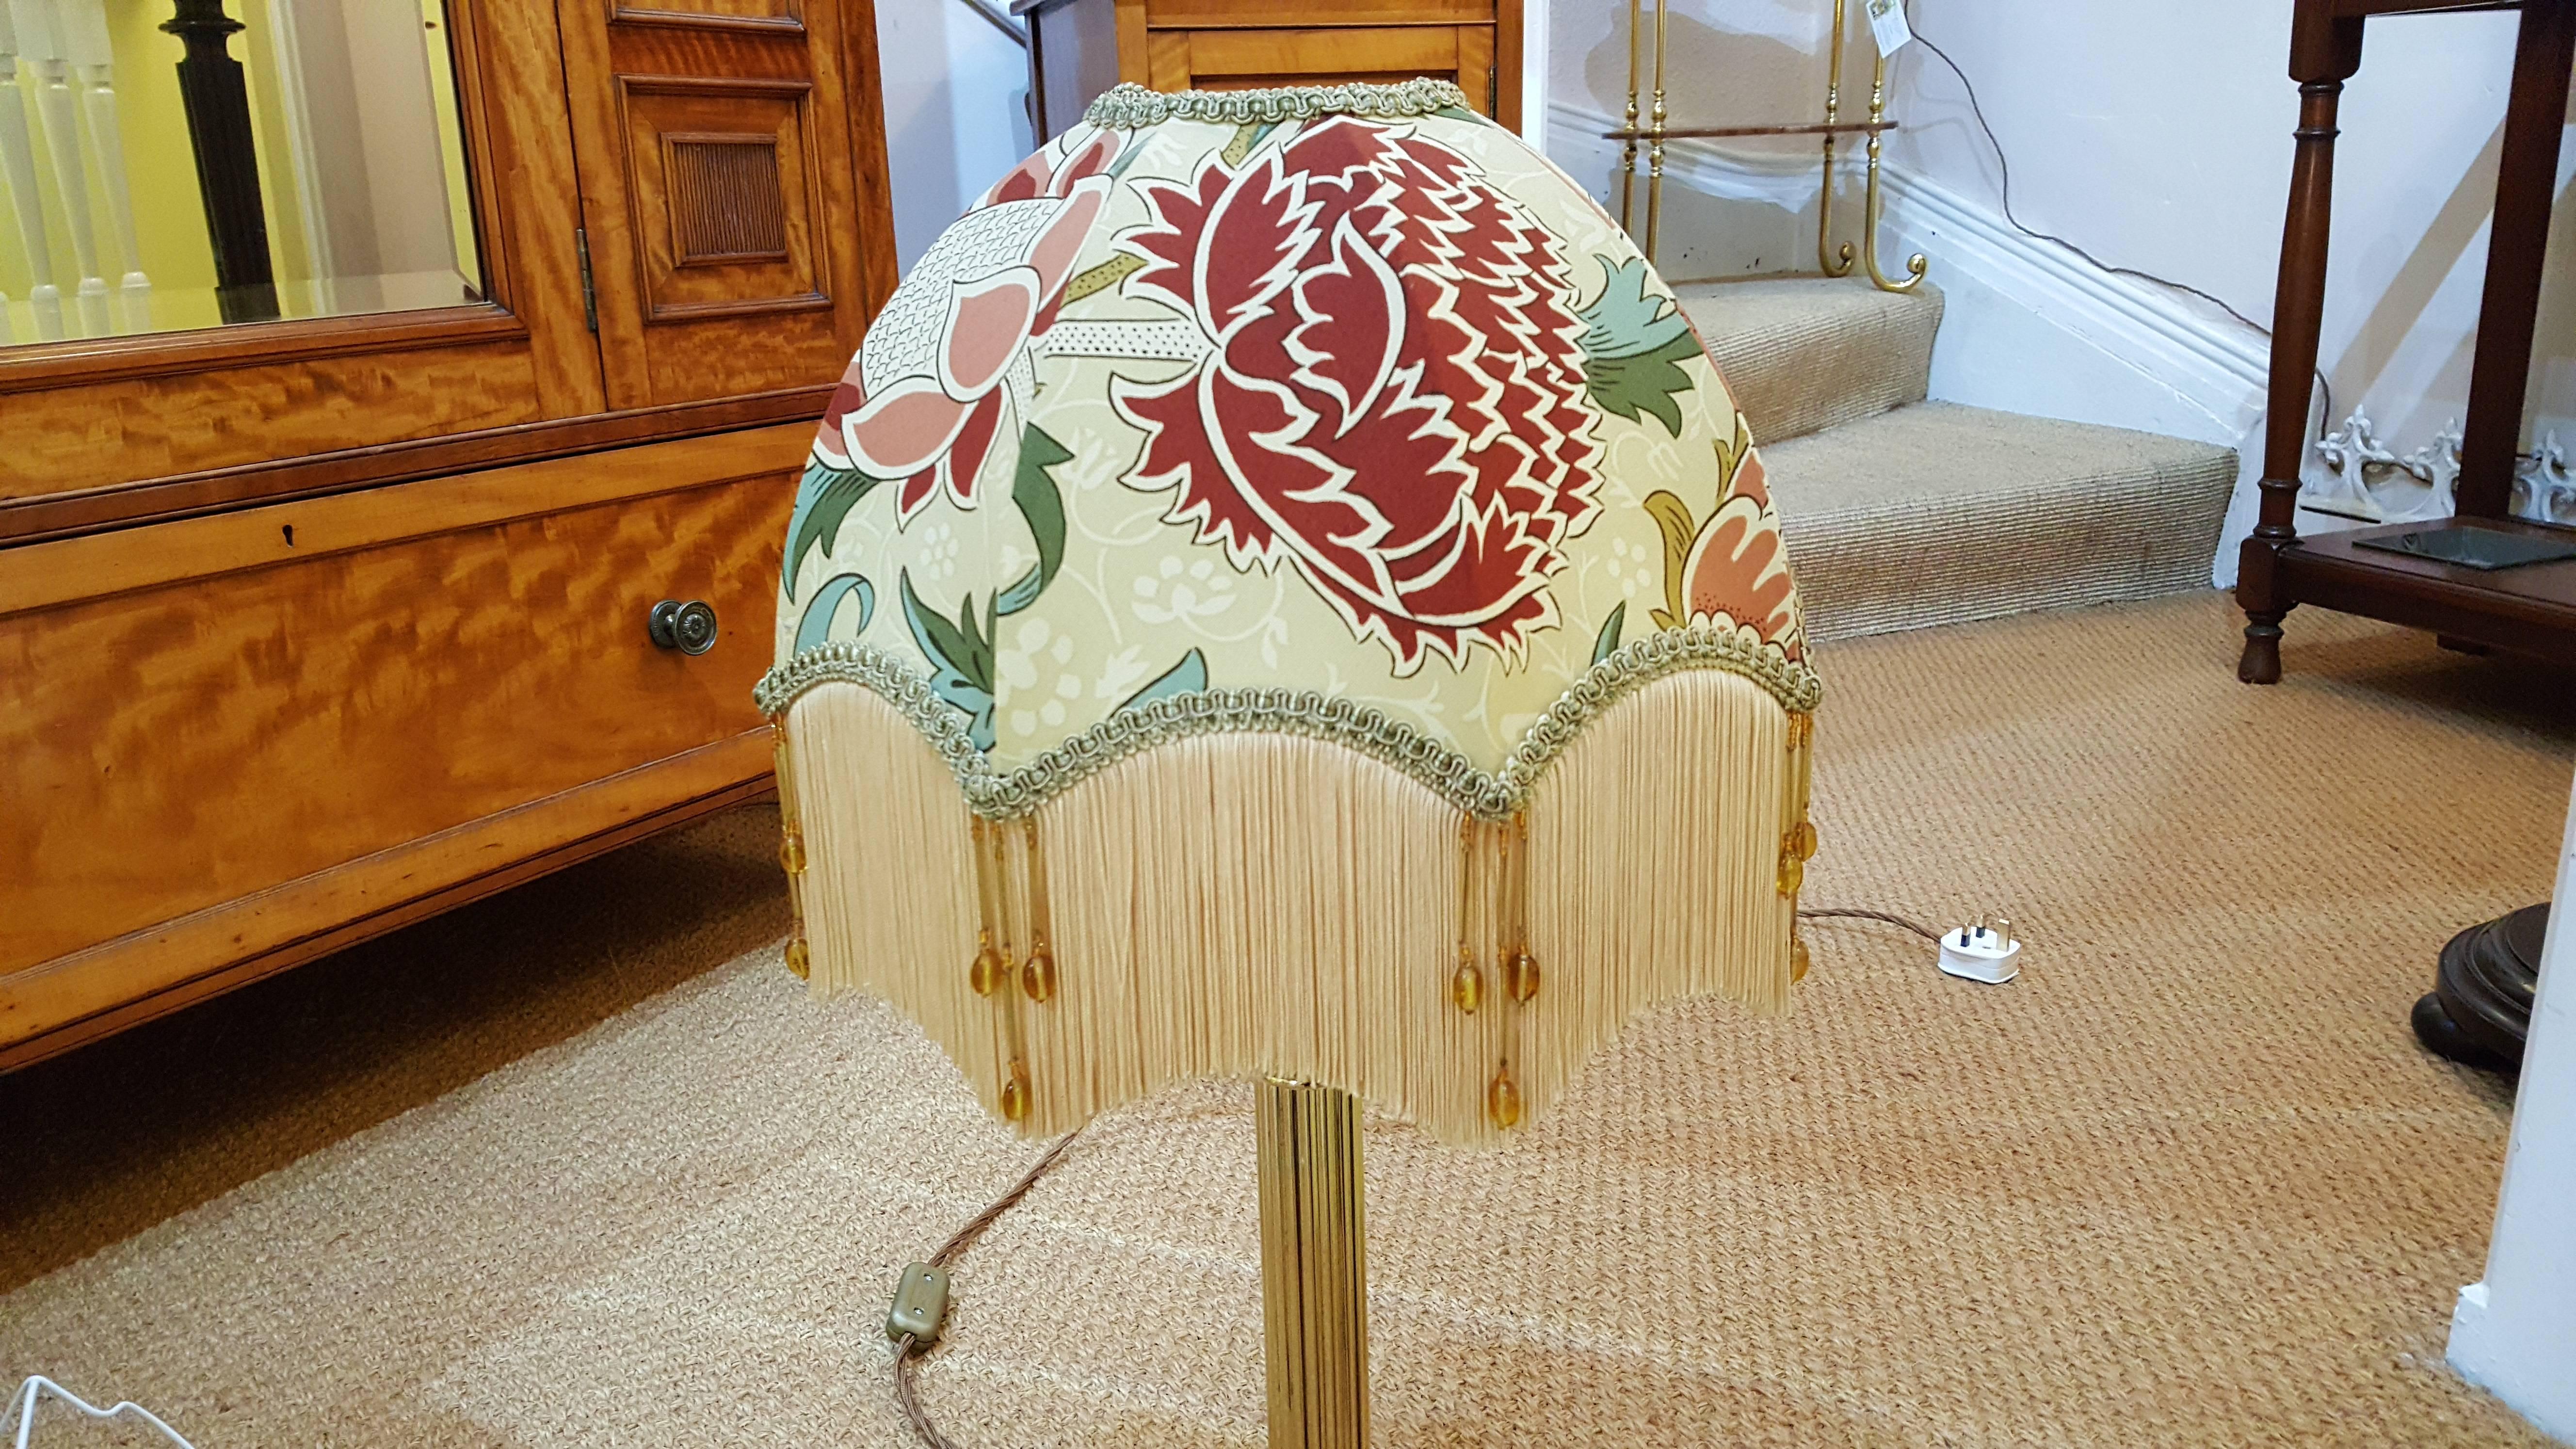 Edwardian brass table lamp in the form of a Corinthian column on a stepped platform base, the lampshade(s) are newly handmade silks by the same maker as provides the shades for Downton Abbey, all lights and lamps have been rewired with authentic